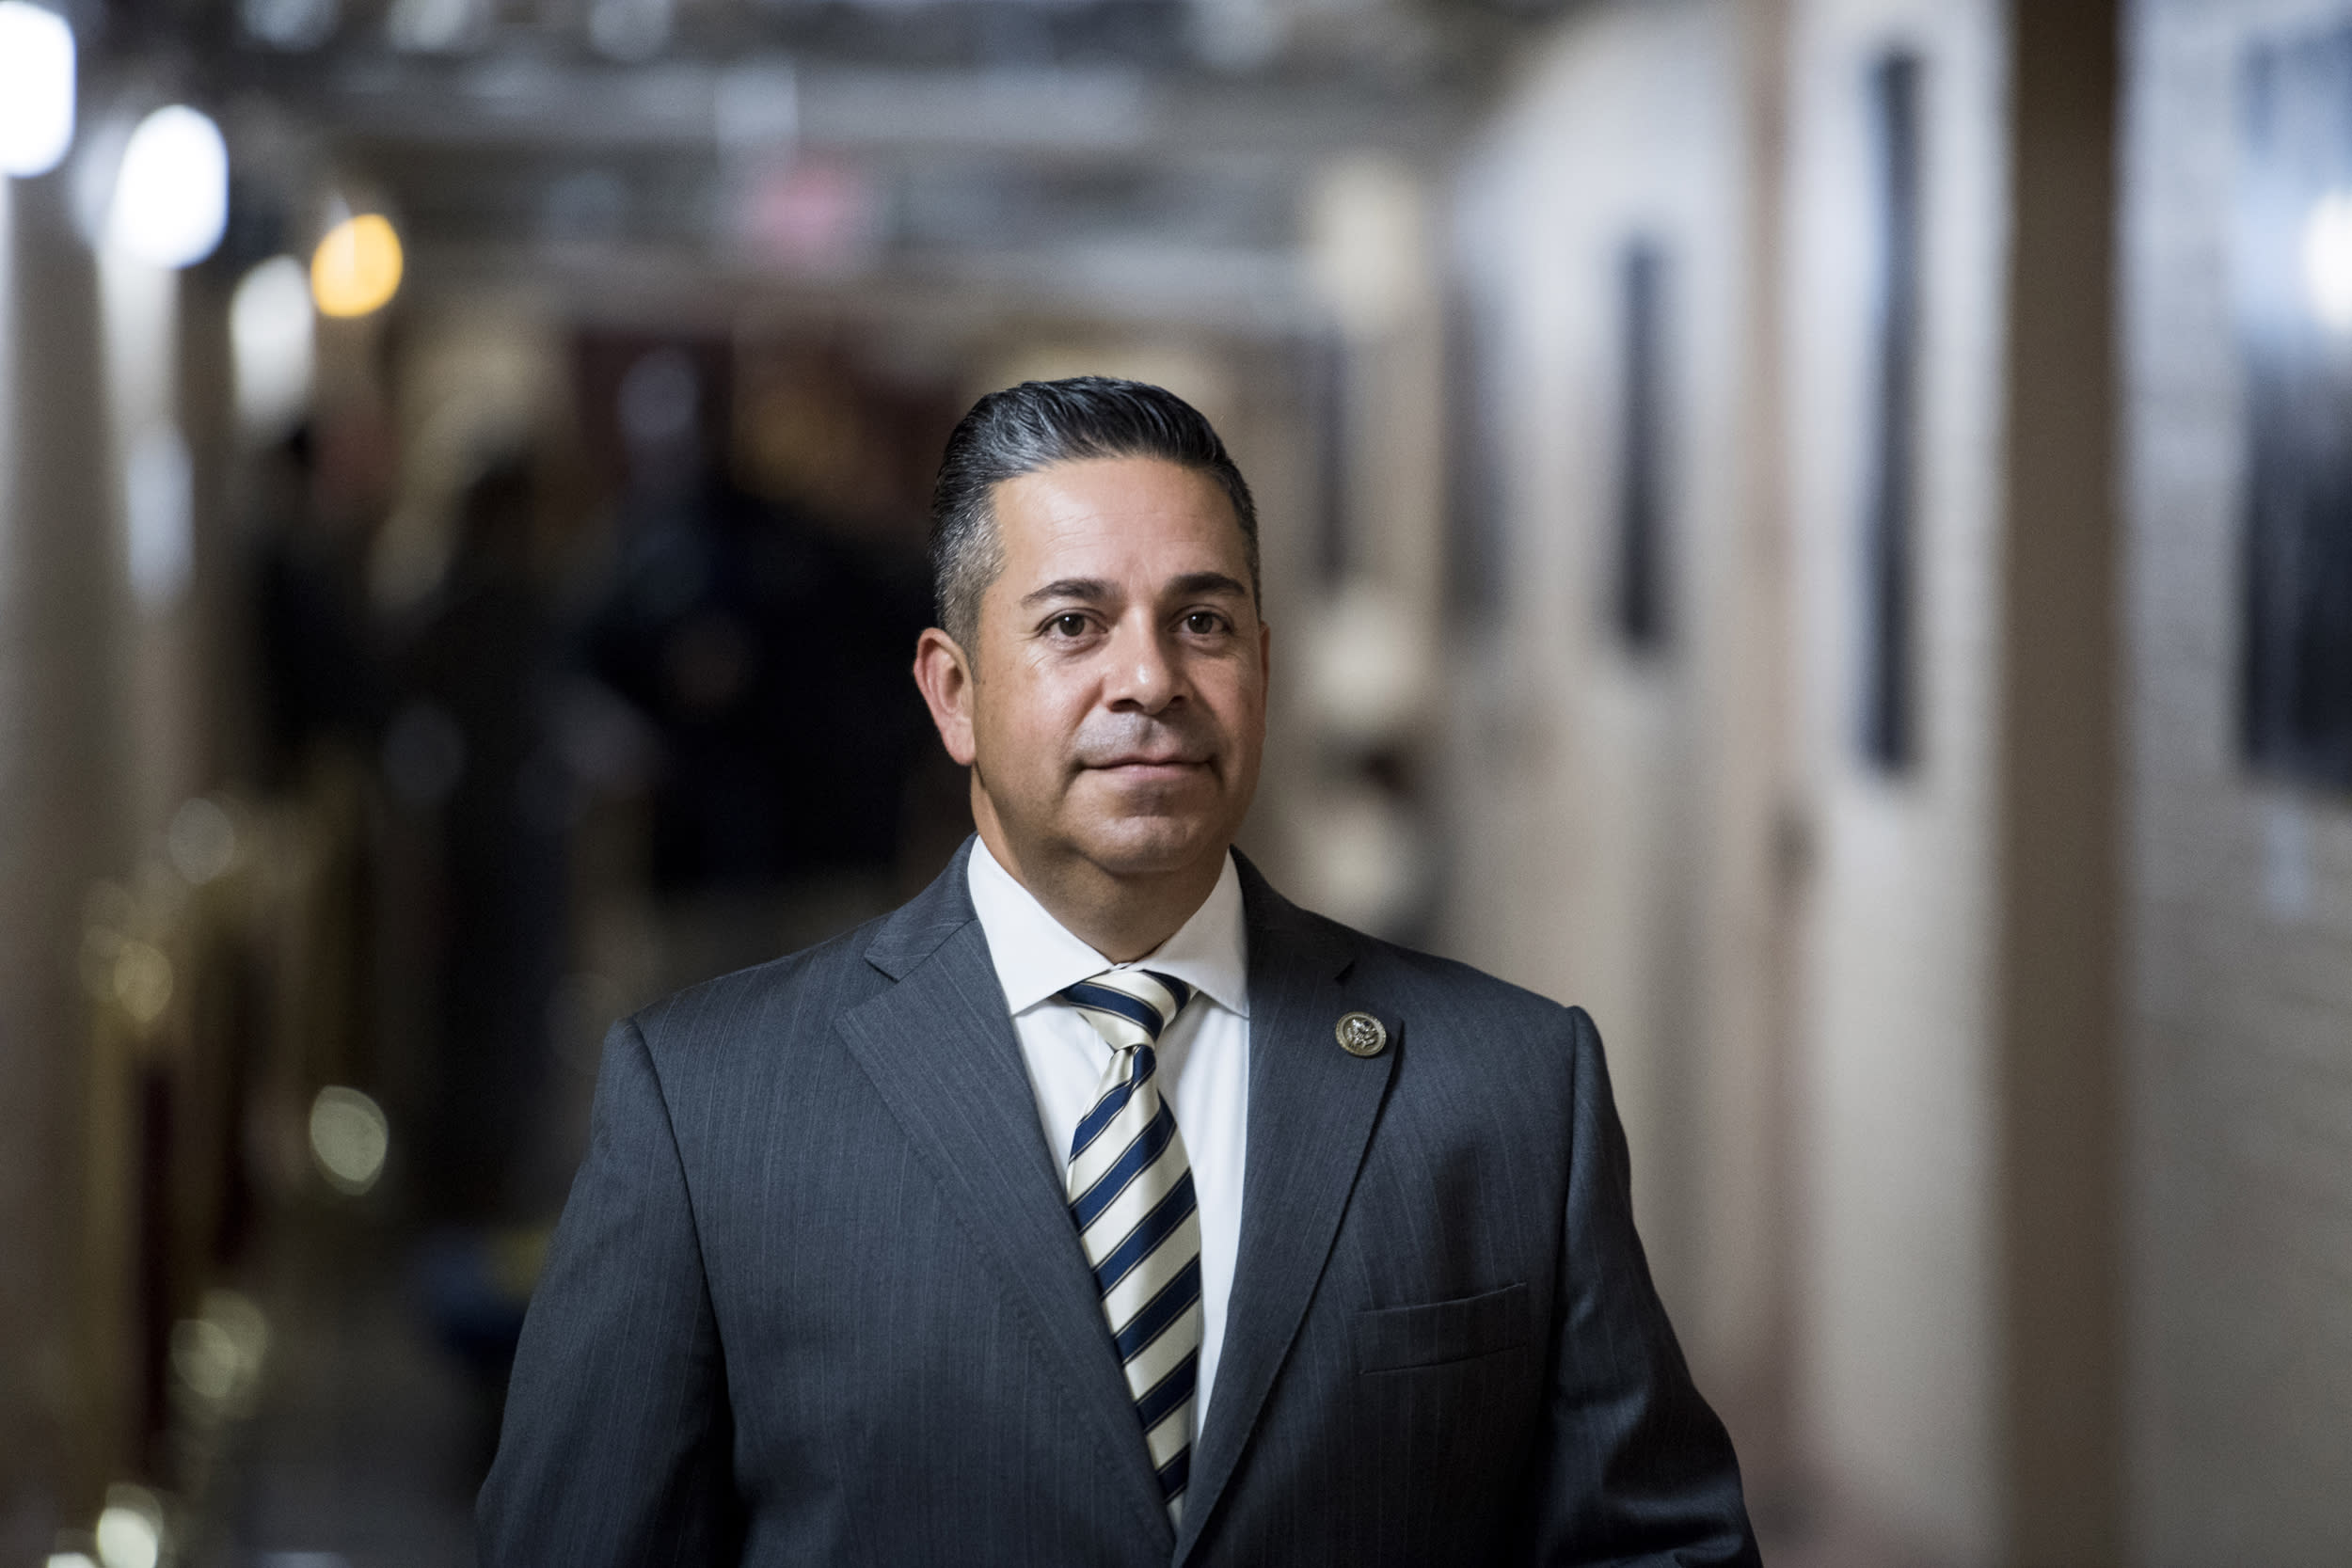 Latinos gain a Senate seat with Ben Ray Lujan's win in New Mexico